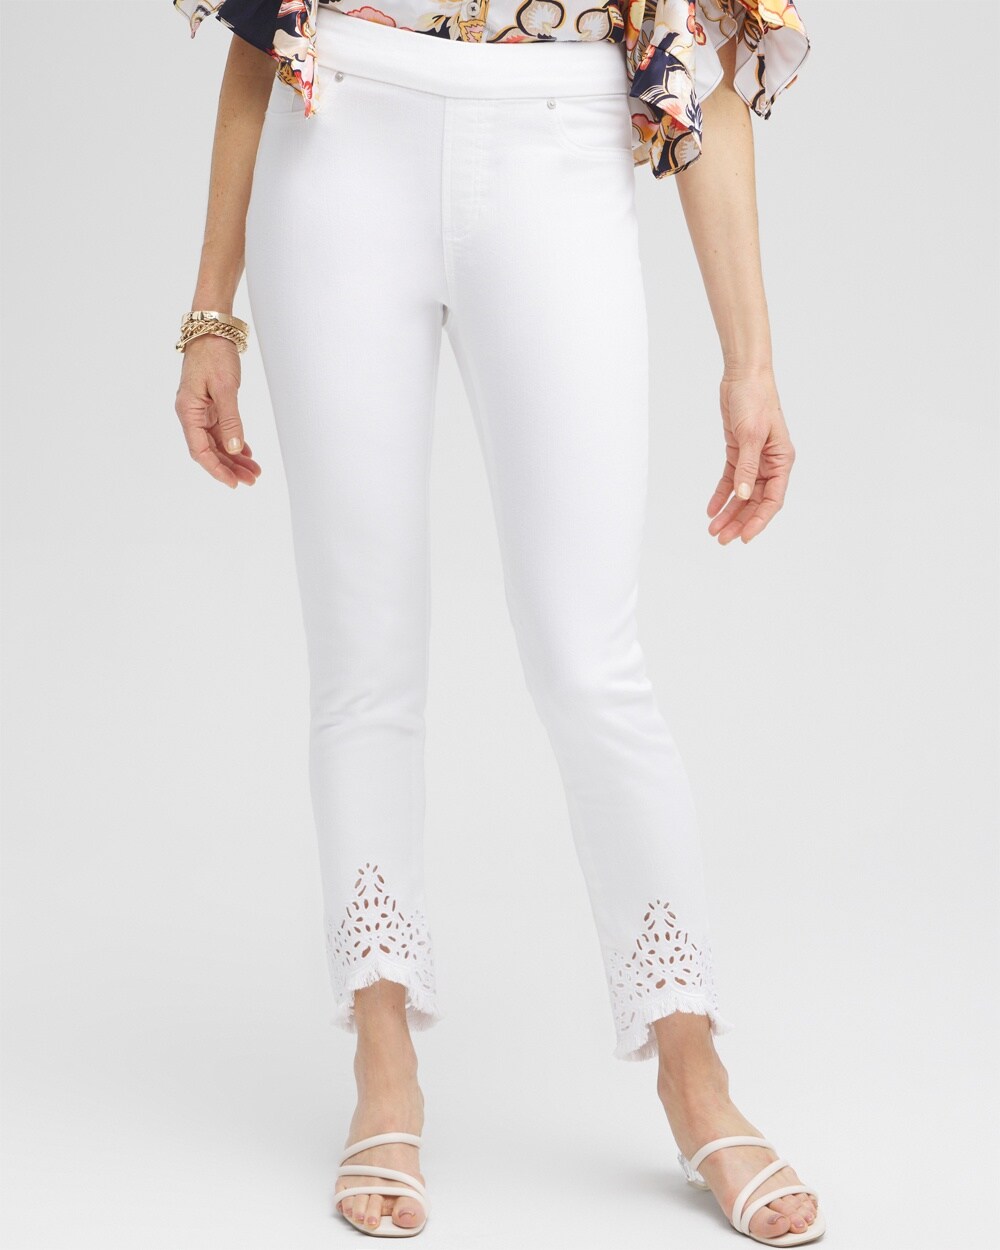 Chico's Eyelet Tulip Hem Pull-on Ankle Jeggings In White Size 4p/6p |